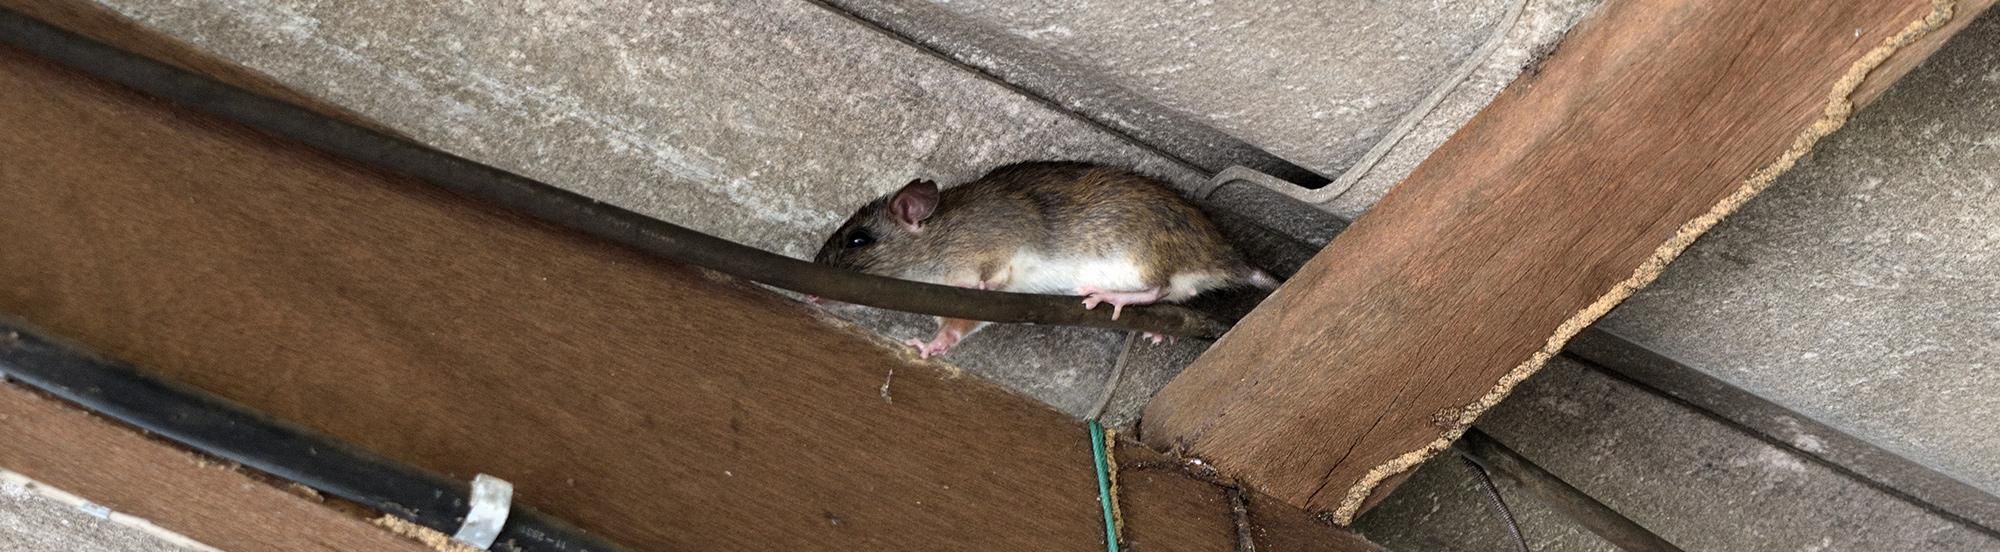 roof rat climbing in rafters